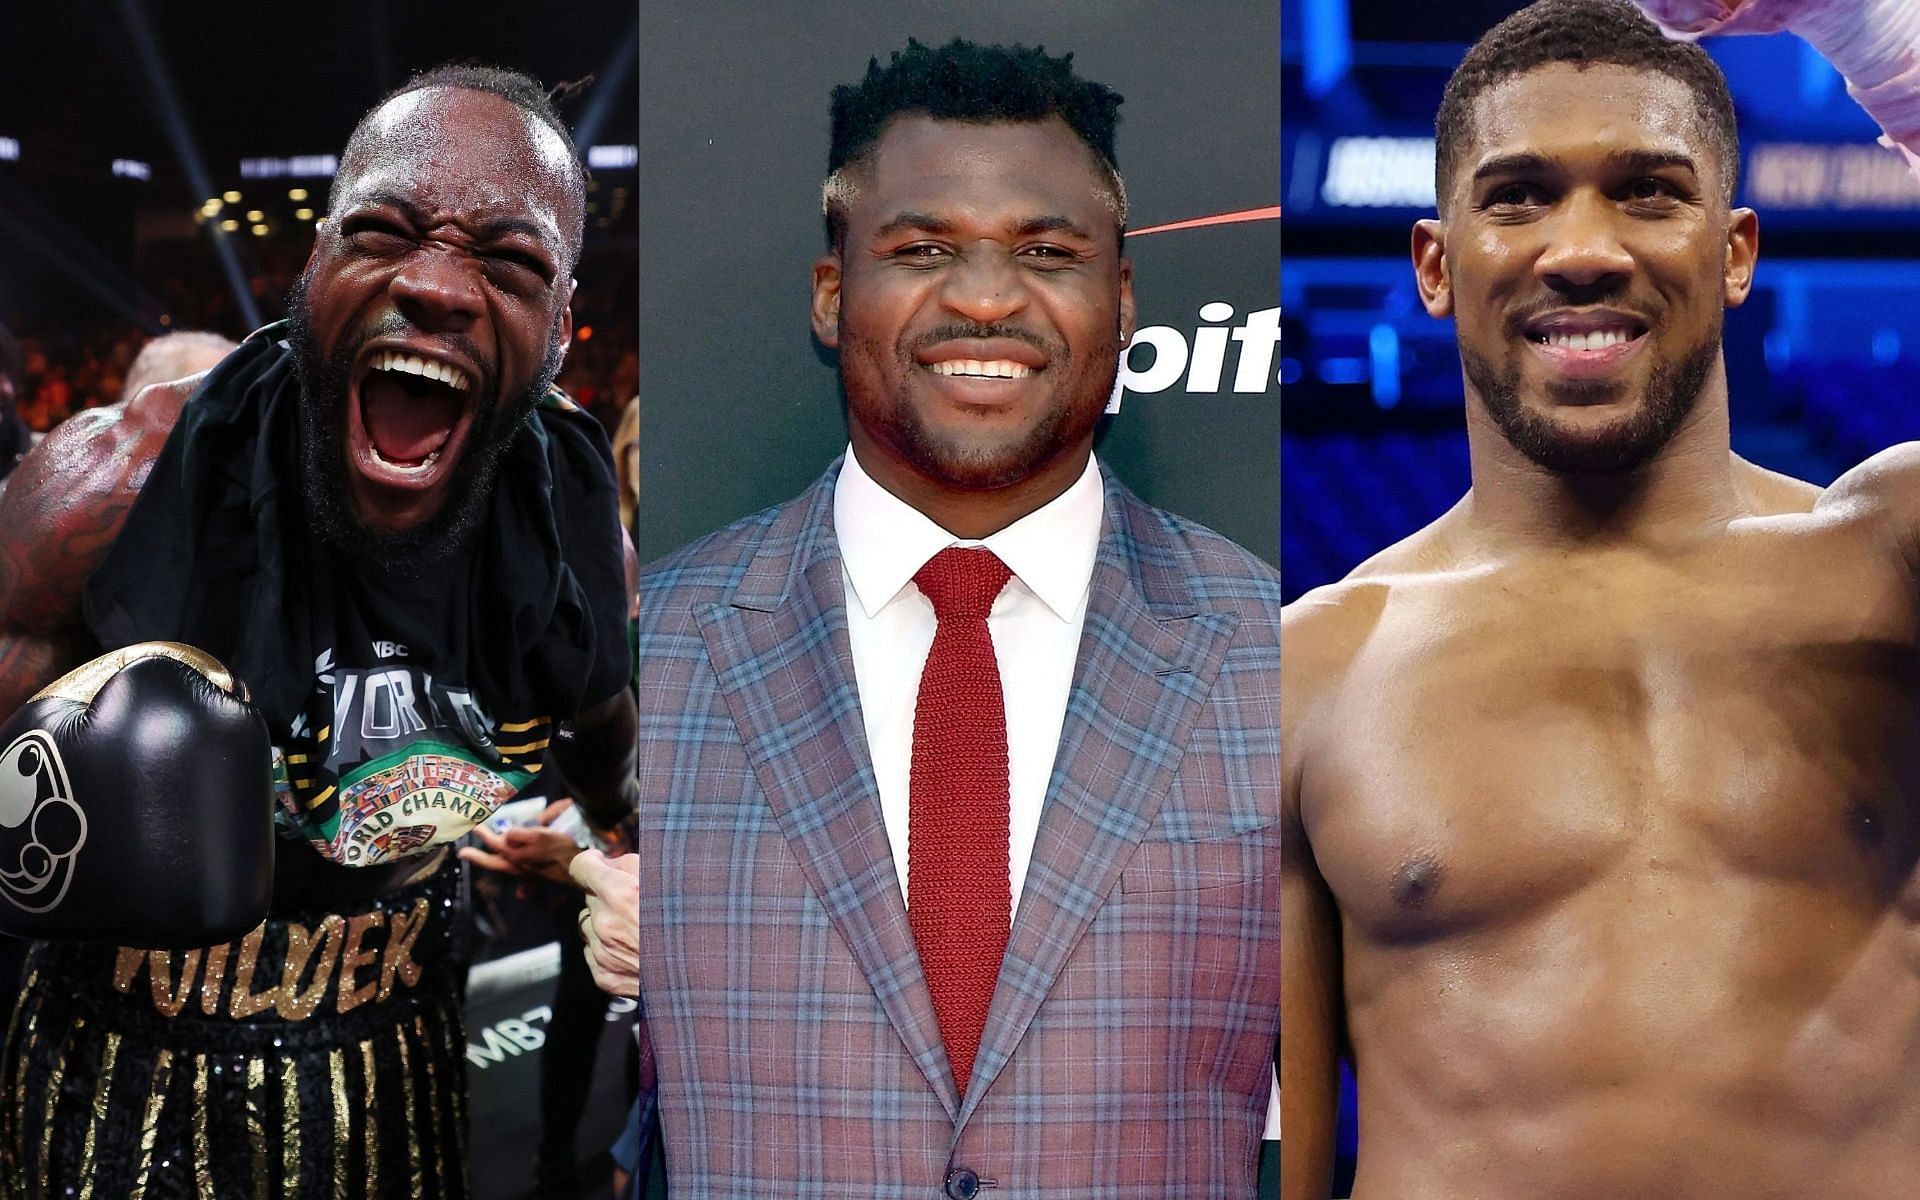 Deontay Wilder (L), Francis Ngannou (M). and Deontay Wilder (R).